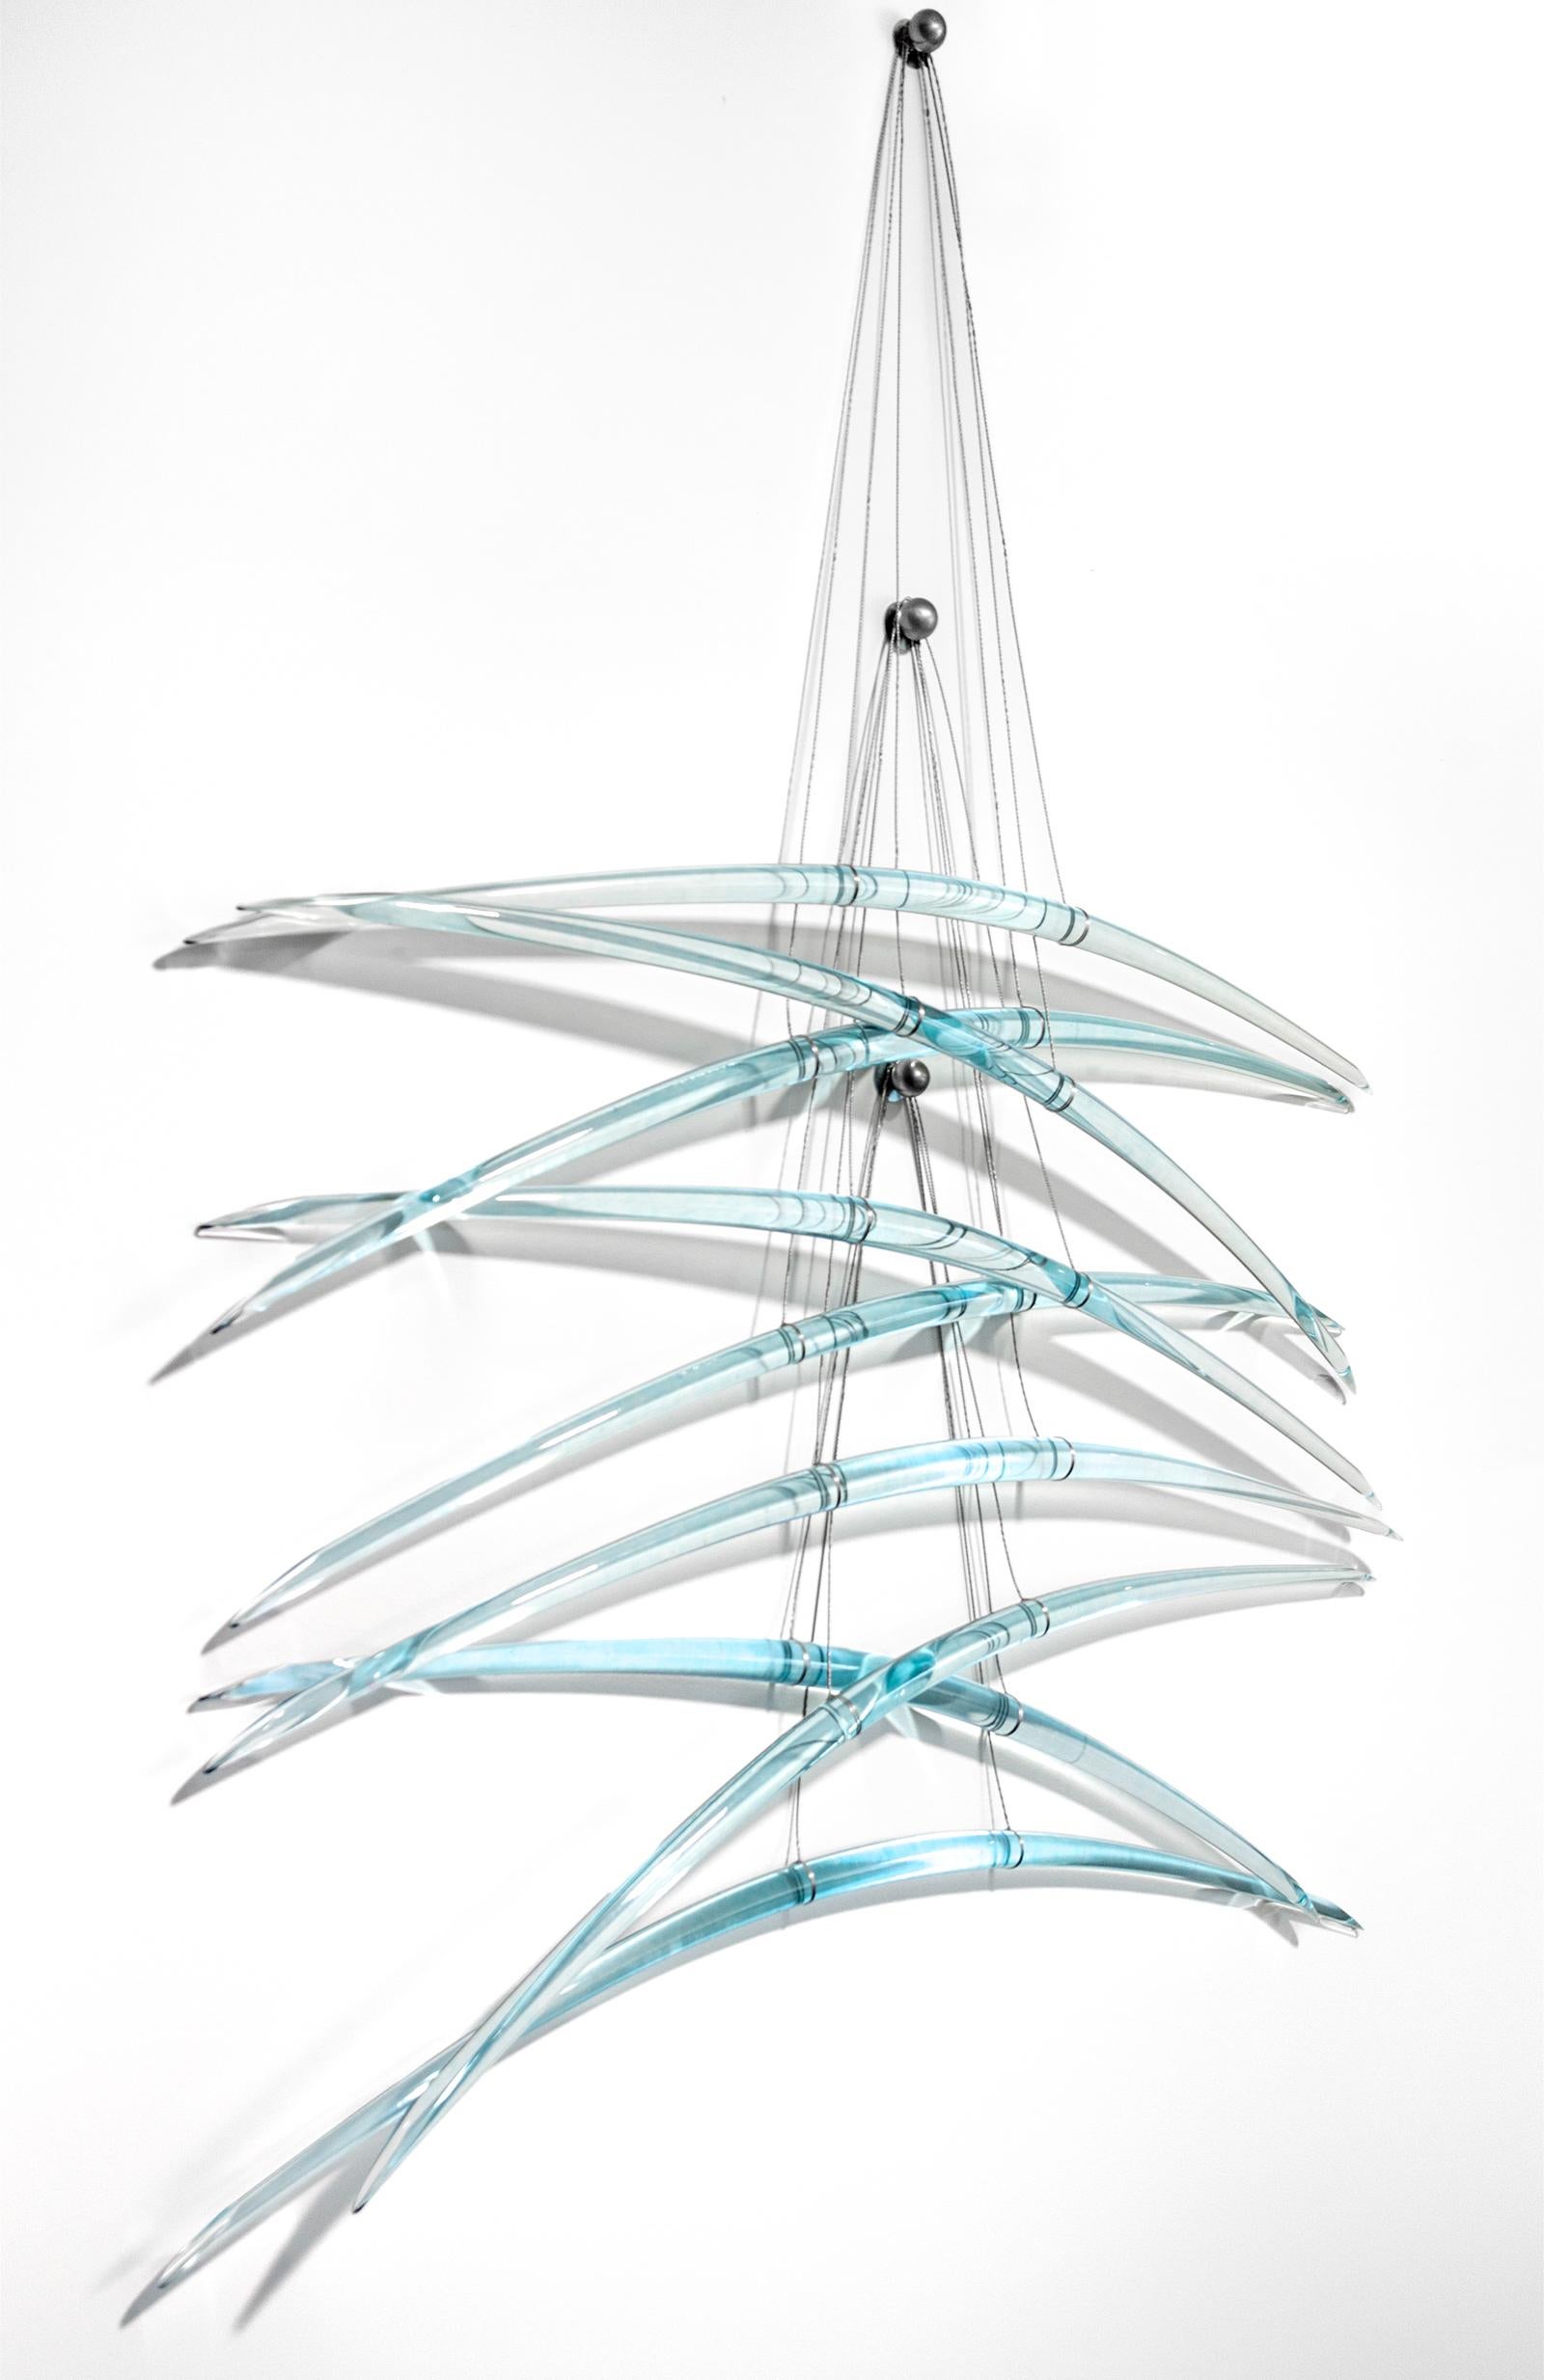 Duality B2 - blue, translucent, abstract, glass, steel, suspended wall sculpture For Sale 6